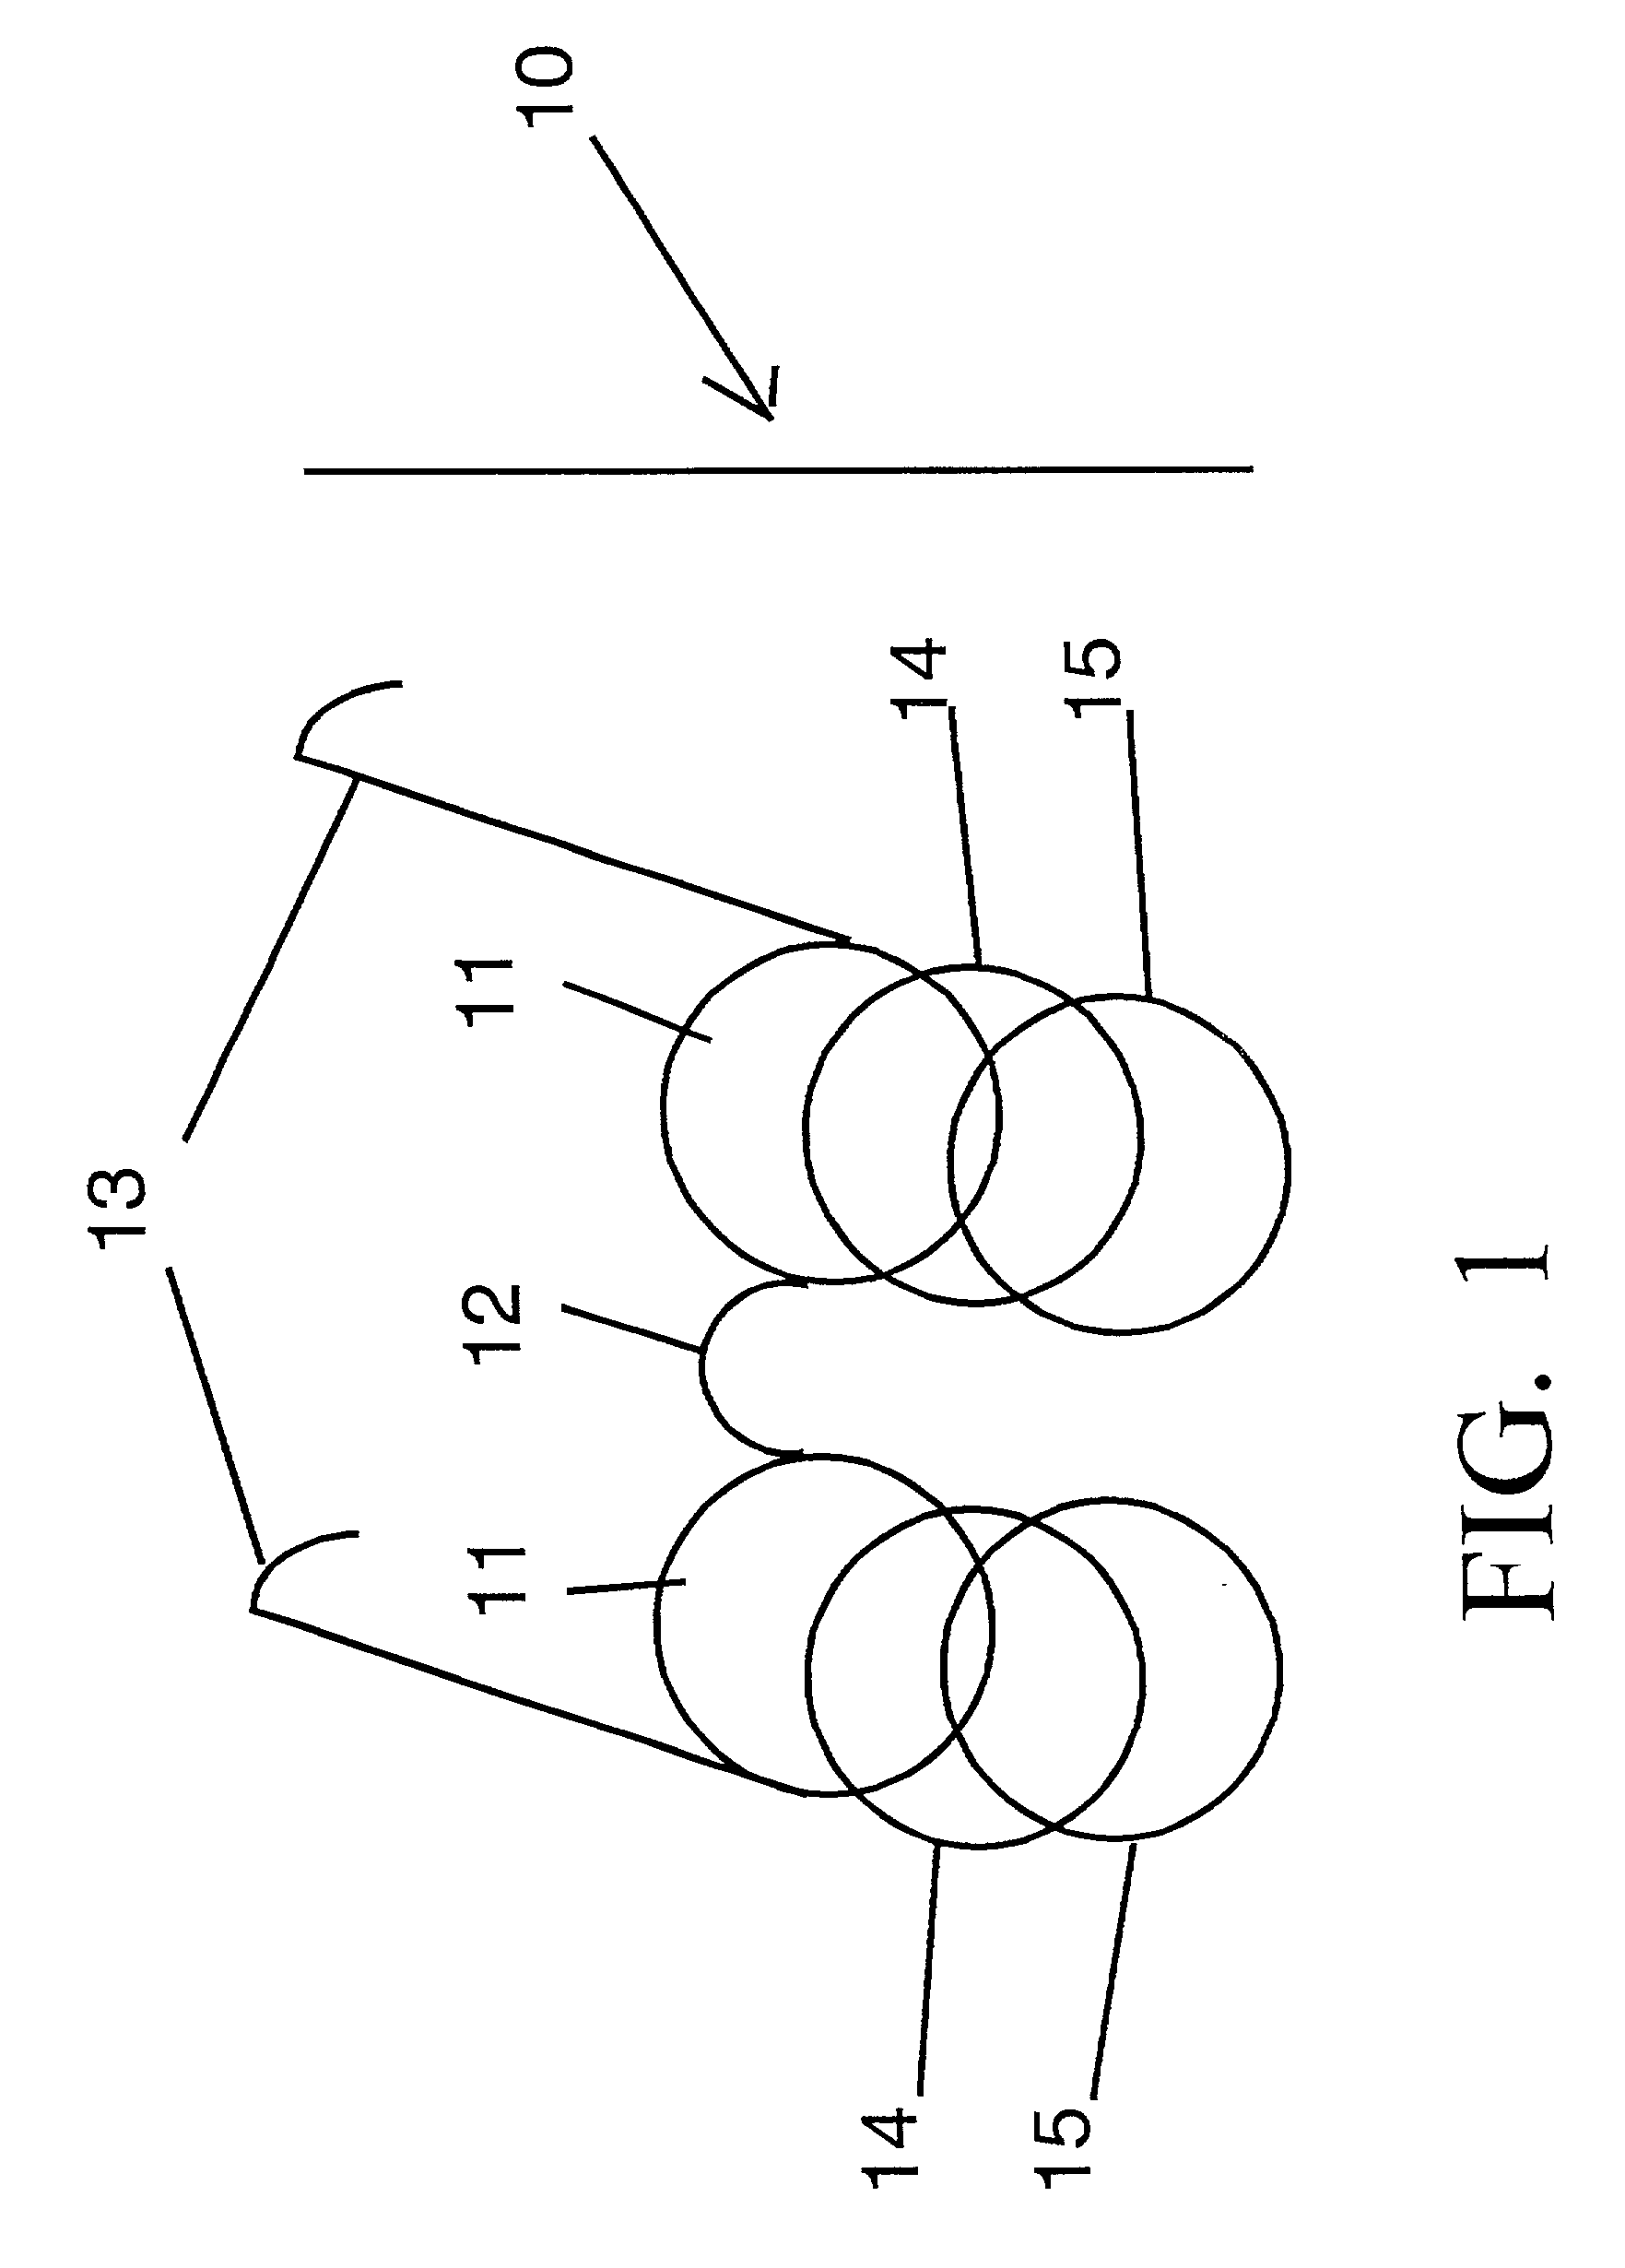 Optical system for increasing contrast of object viewed through it